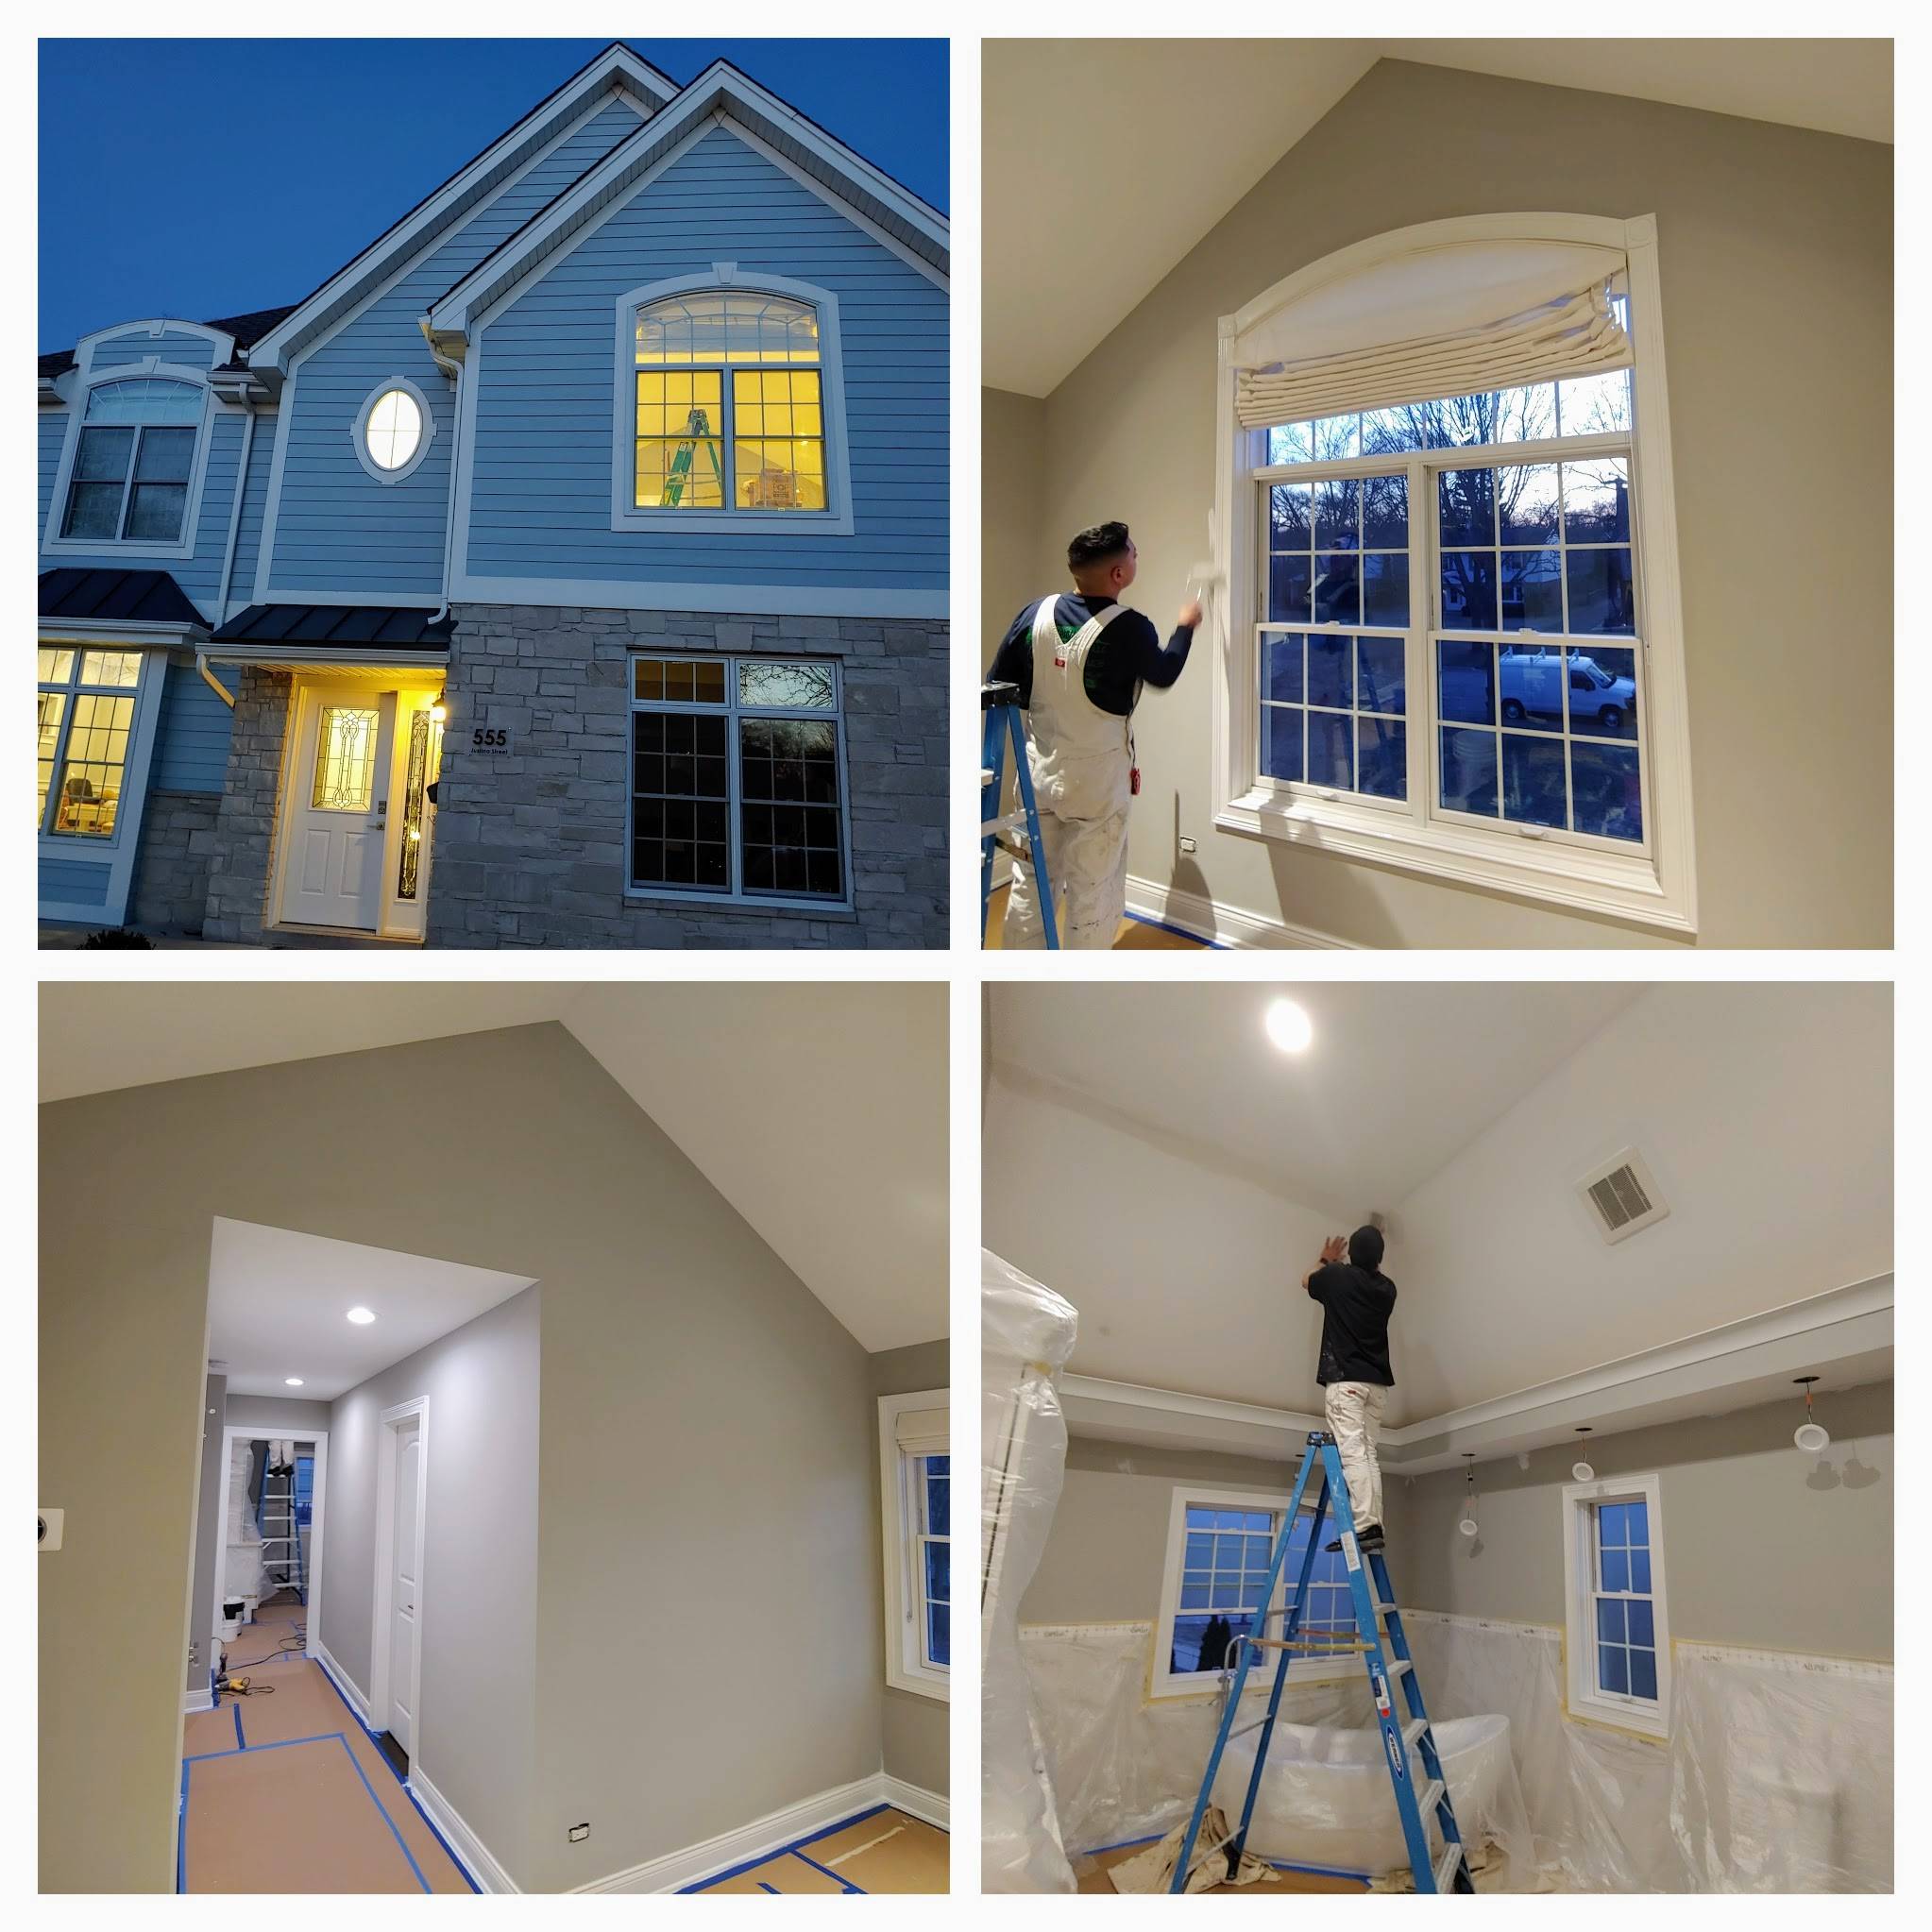 3rd Gen Painting And Remodeling Western Springs IL | 3rd Gen Painting and Remodeling Western Springs ,United States | Phone: (708) 680-6078